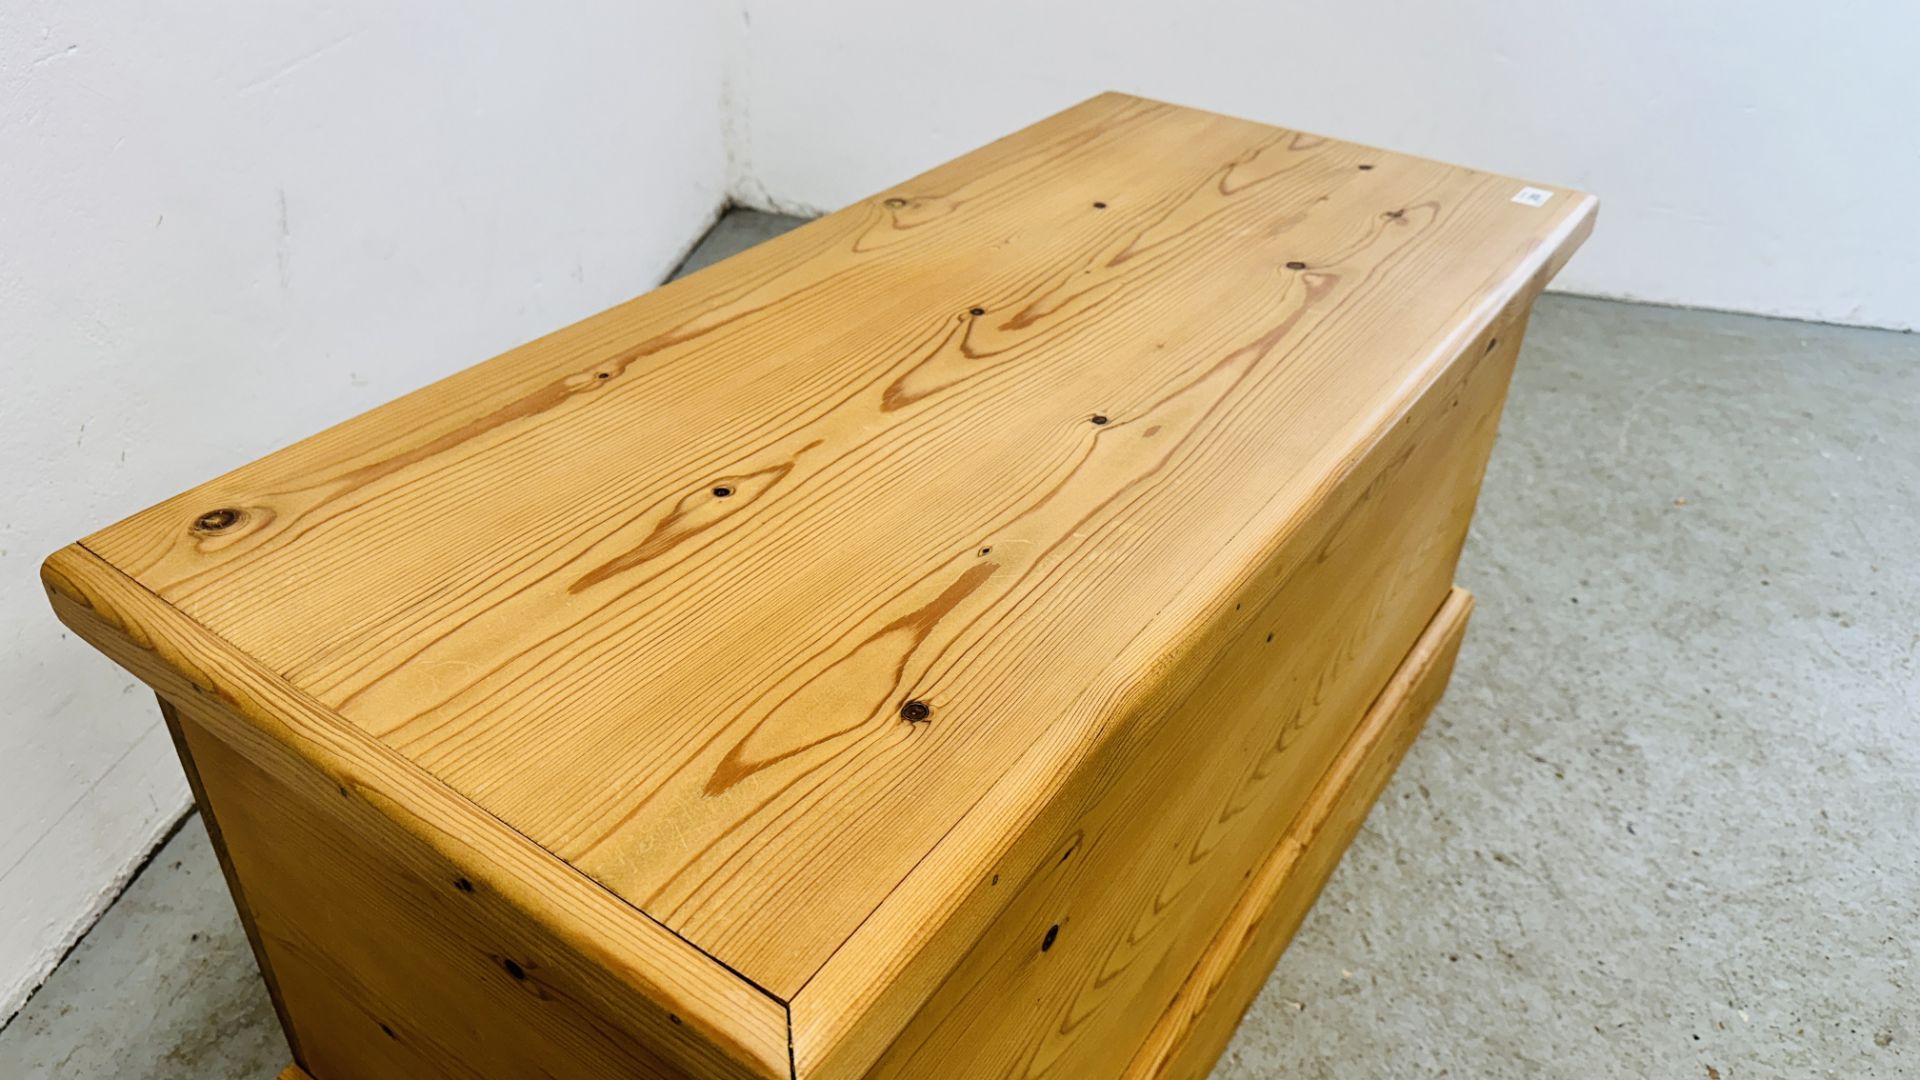 MODERN WAXED PINE HINGED TOP BLANKET / TOY BOX - W 96CM X D 44CM X H 50CM. - Image 5 of 7